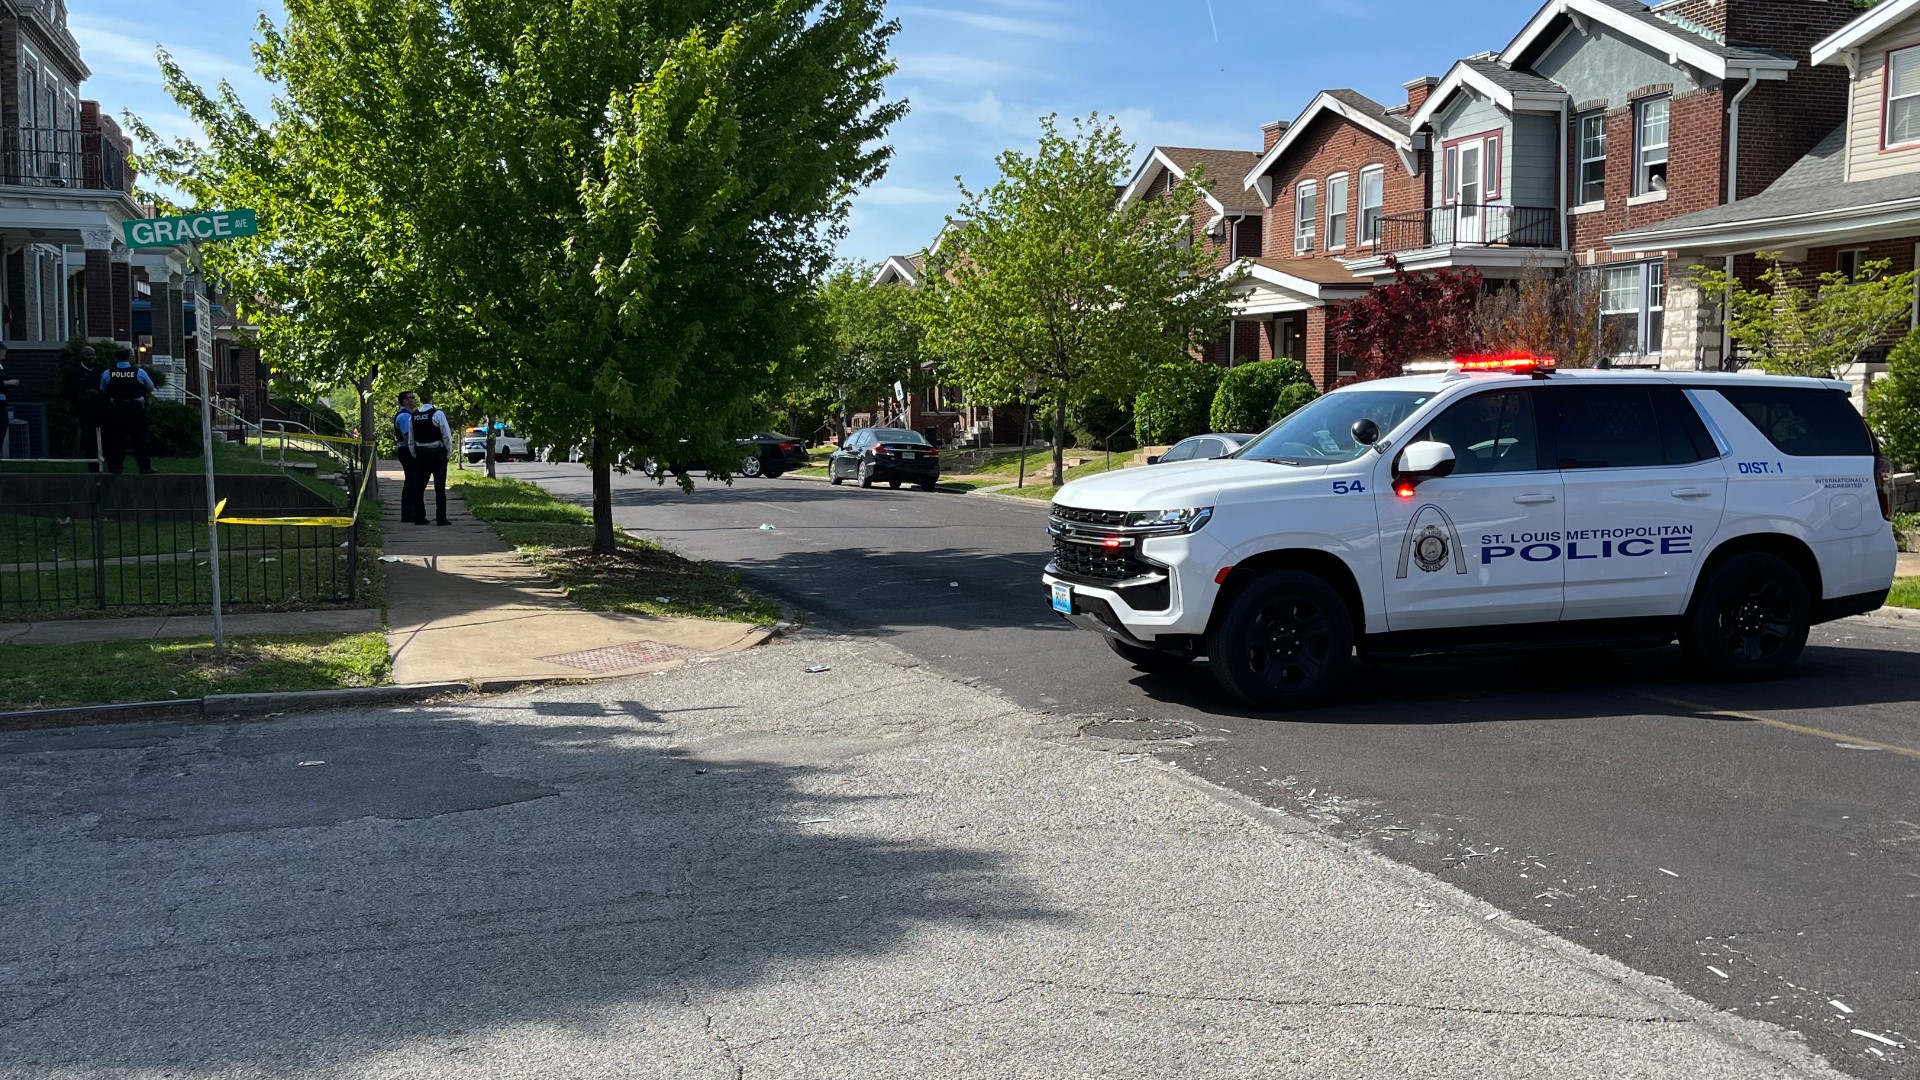 A teenage boy was shot and injured in south St. Louis Monday afternoon, police said. He was reportedly conscious and breathing.